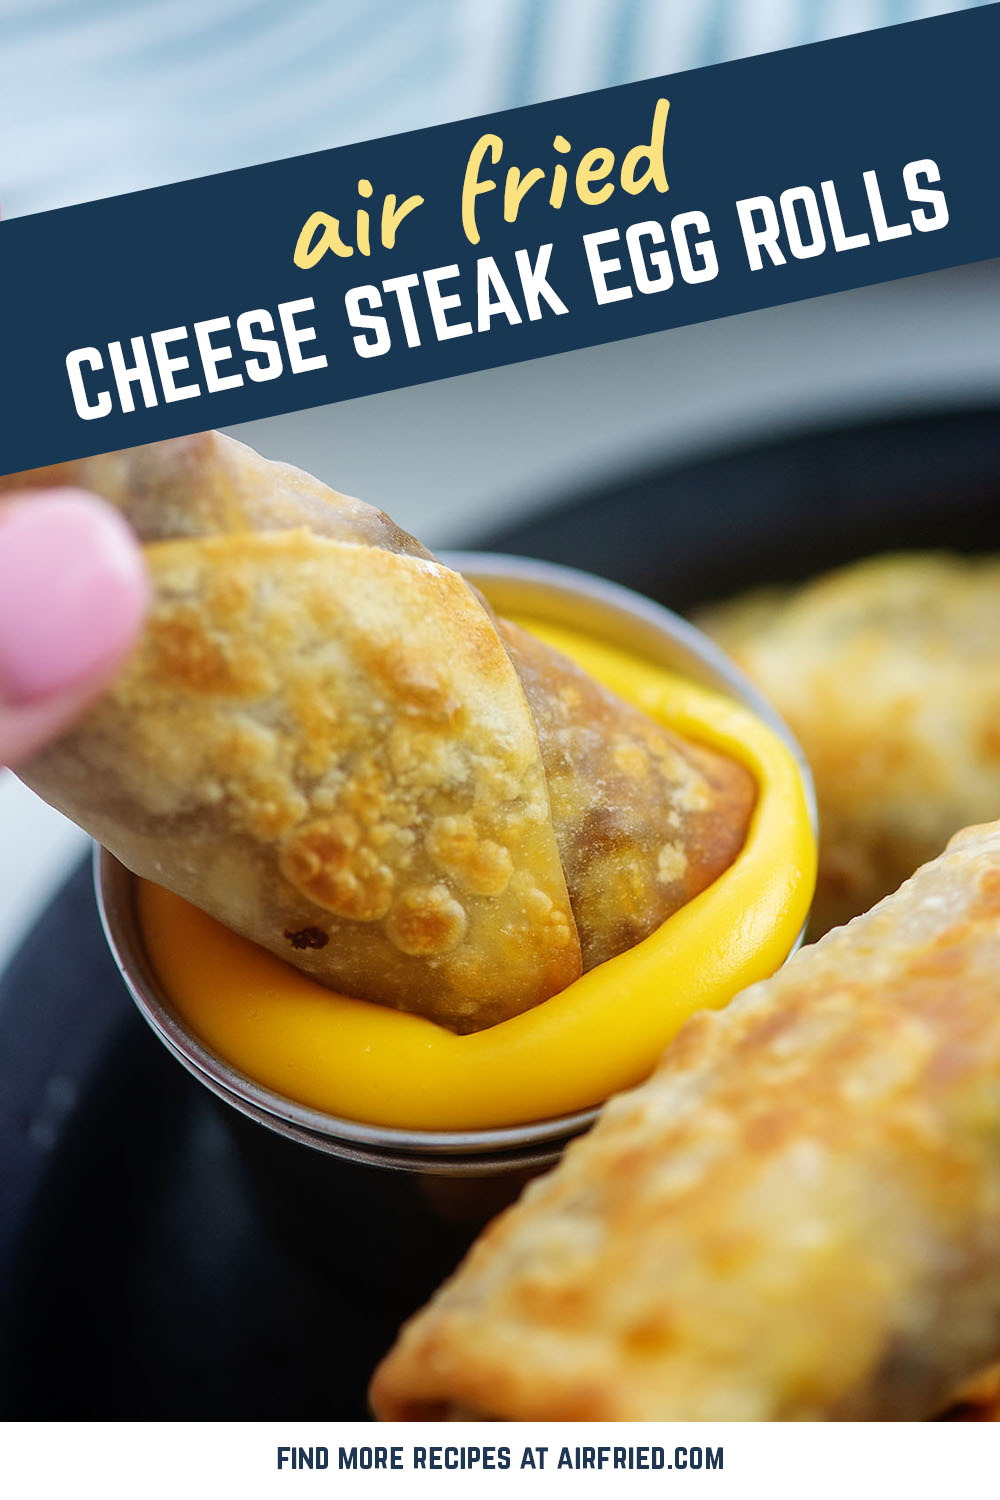 Our cheese steak egg roll recipe is crispy, beefy, and cheesy!  Perfect combo of goodies!